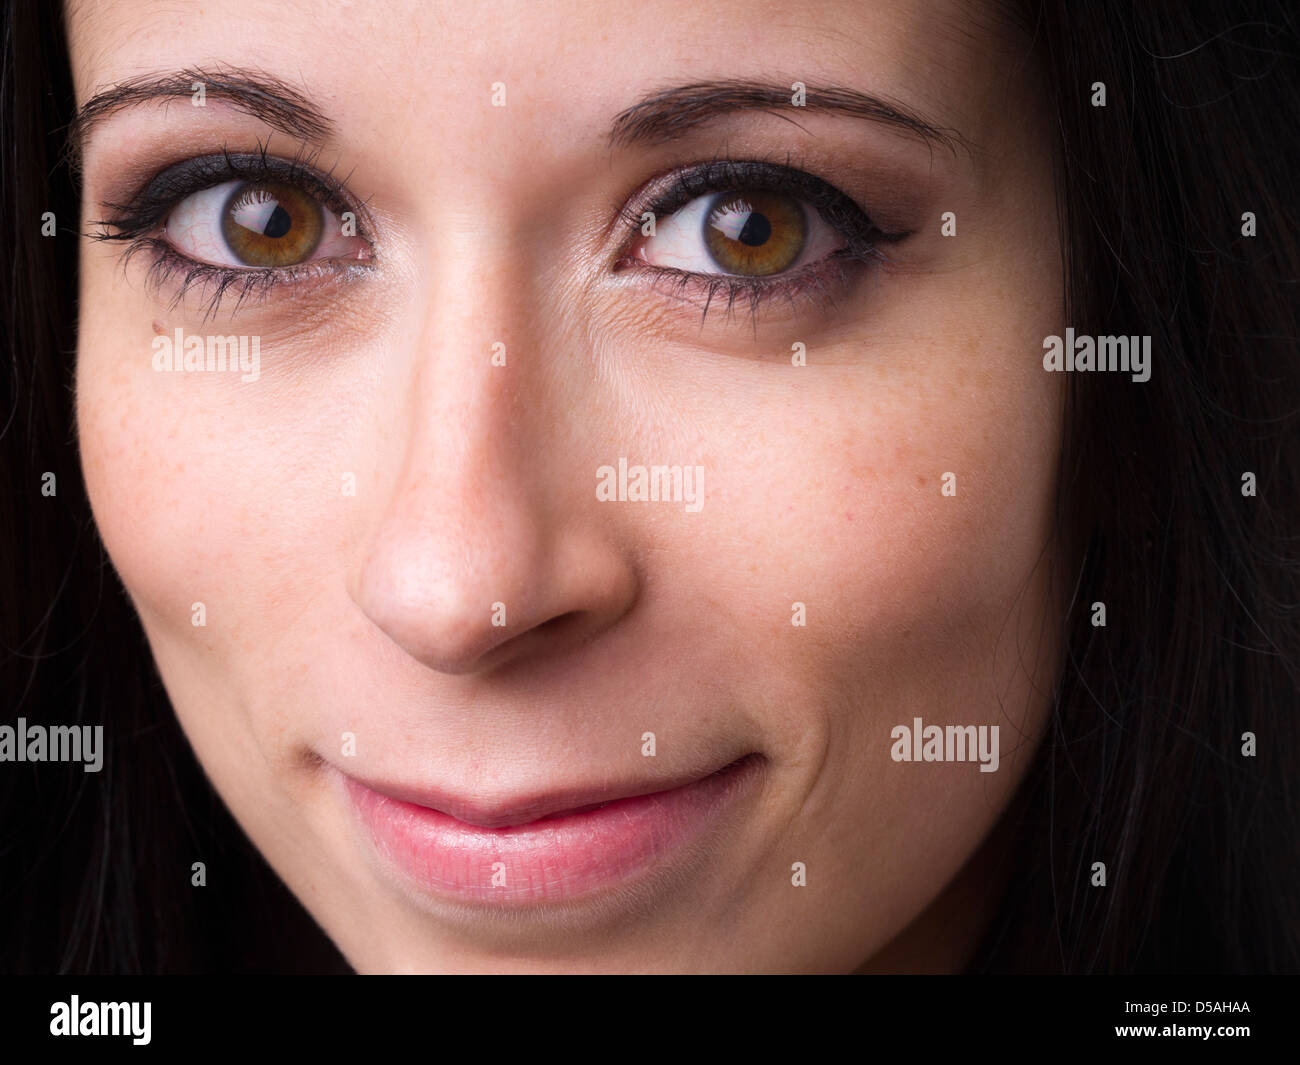 Close up portrait of happy young woman wearing make up Stock Photo